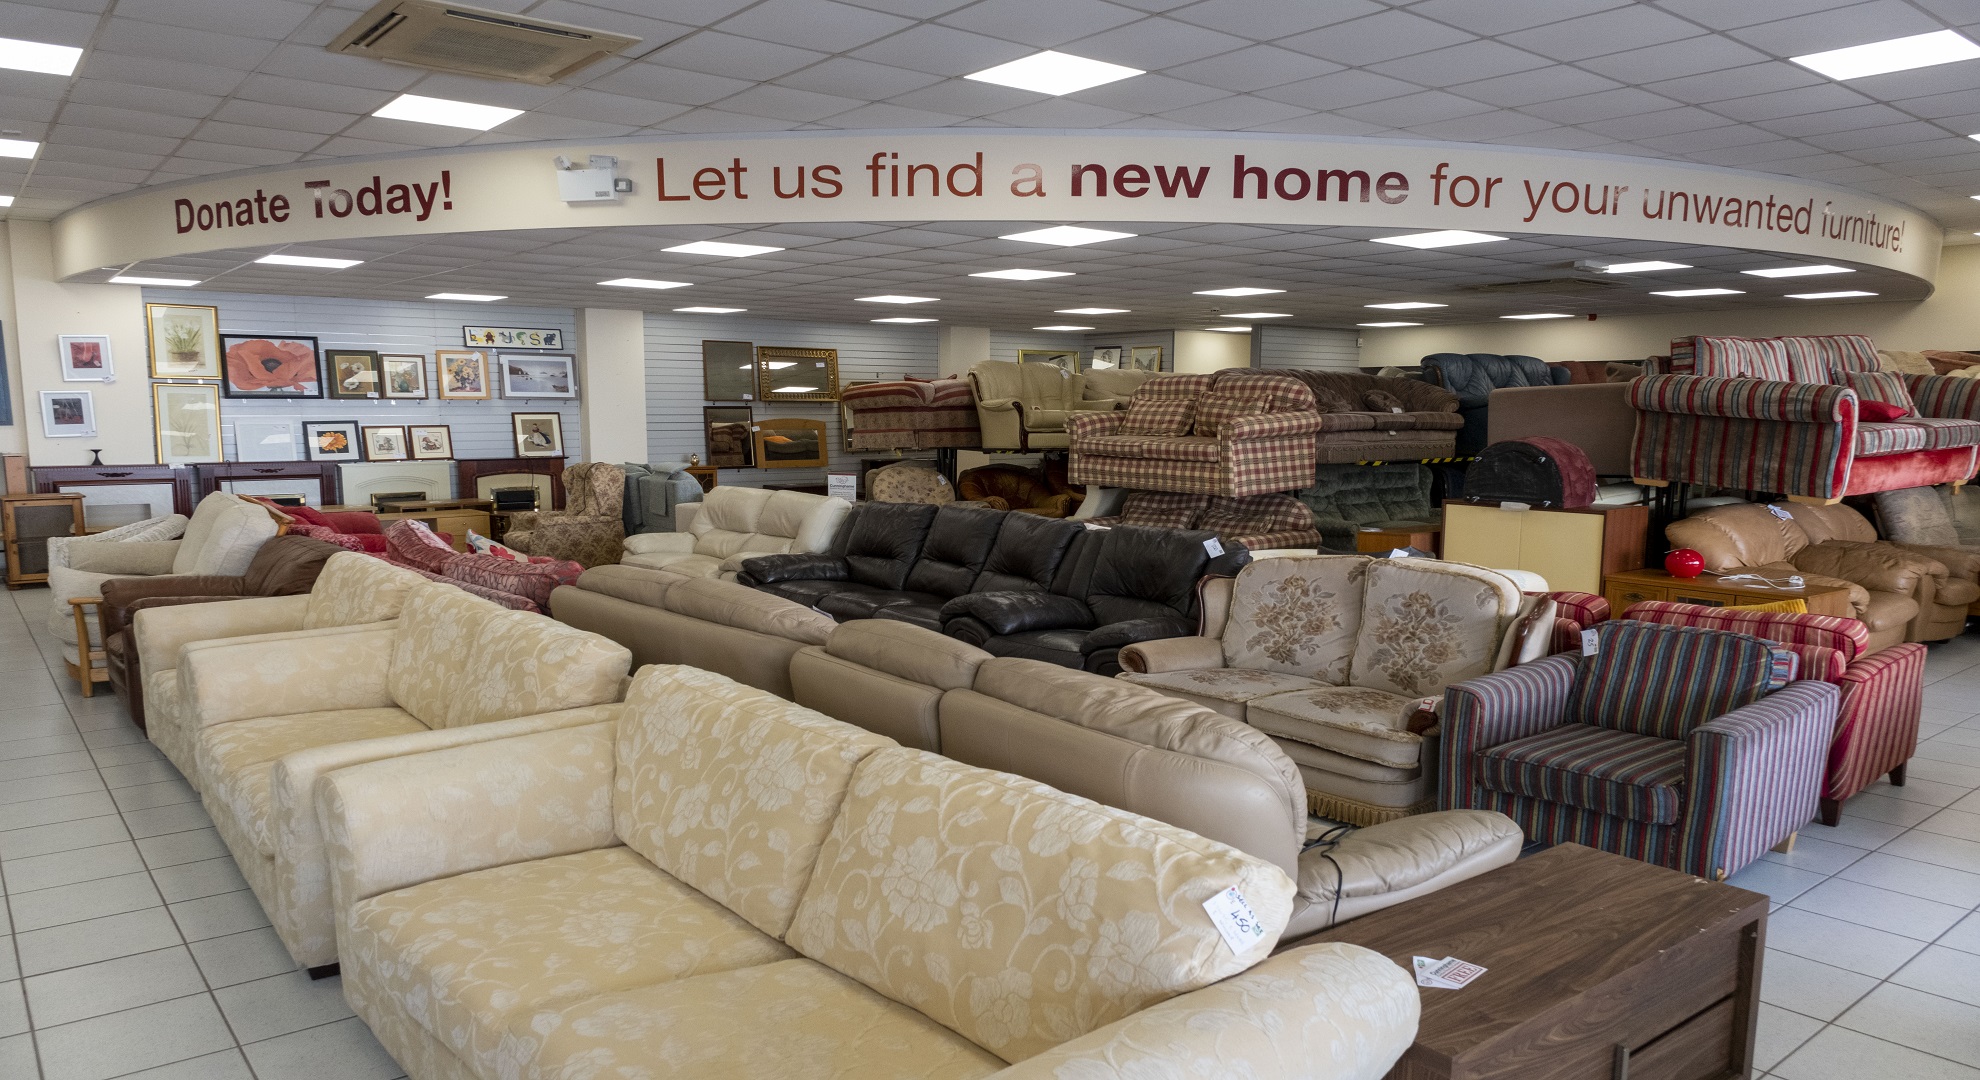 Furniture being given a second chance at life by Circular Communities Scotland